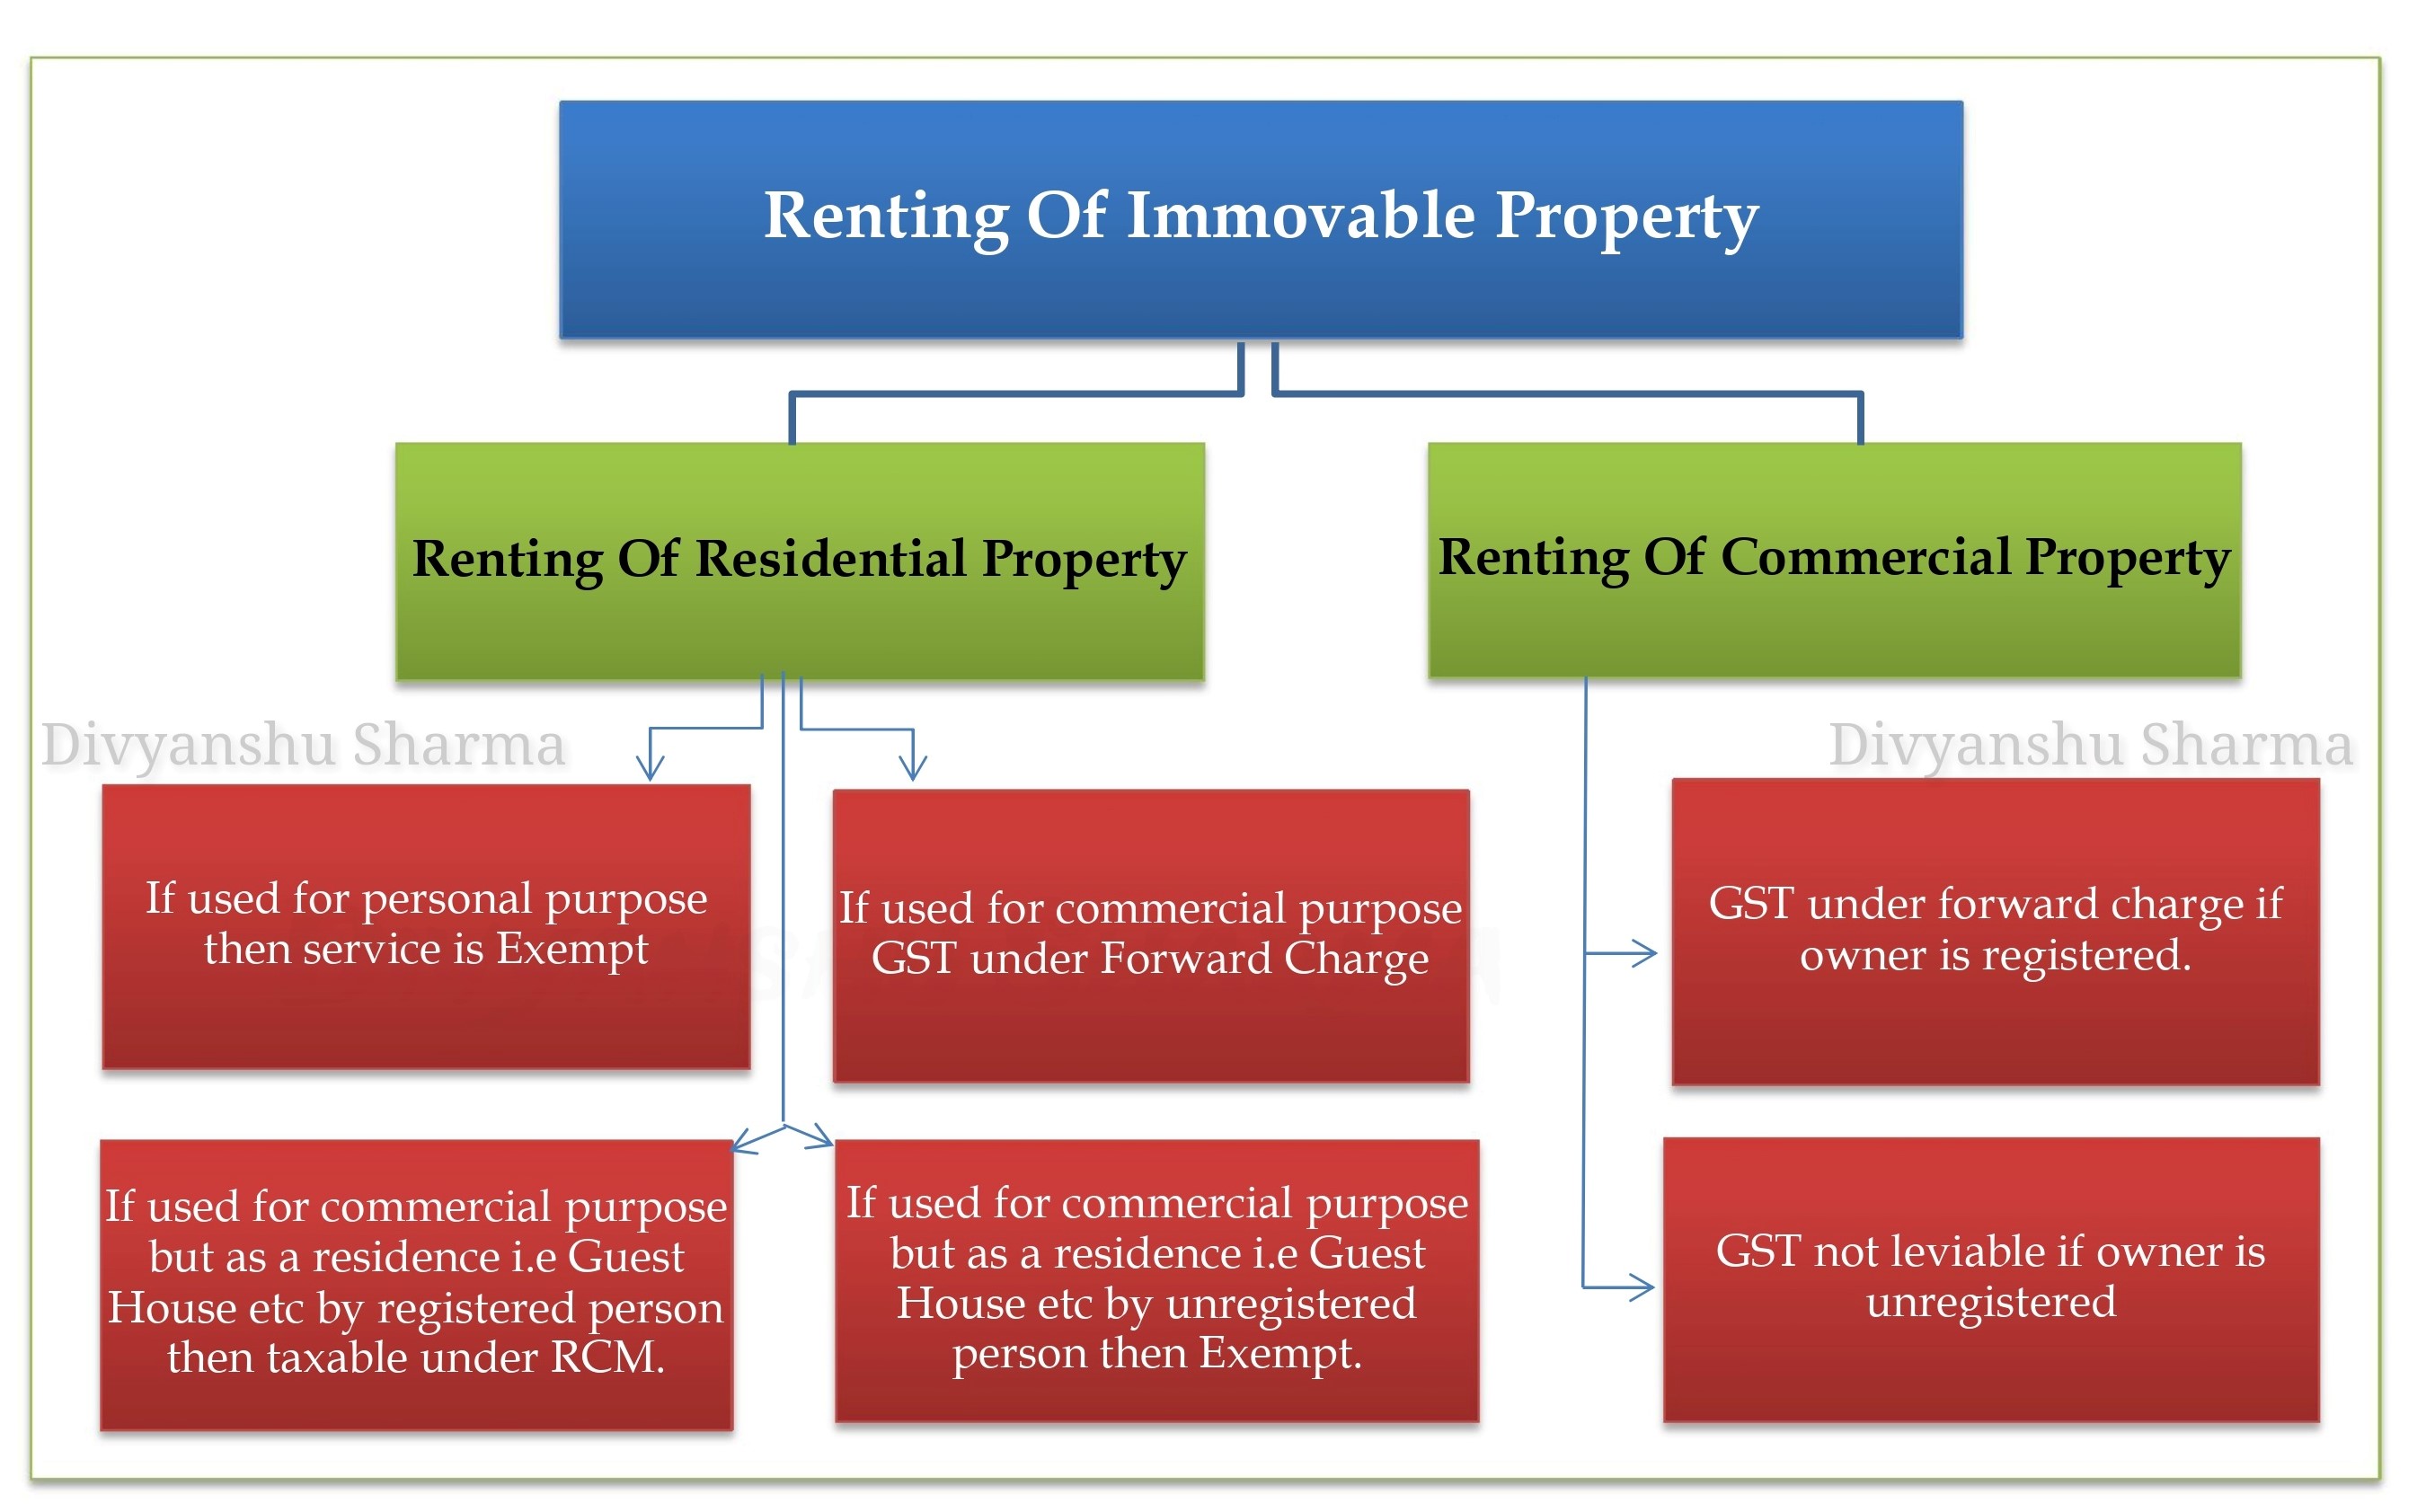 Renting of Immovable Property